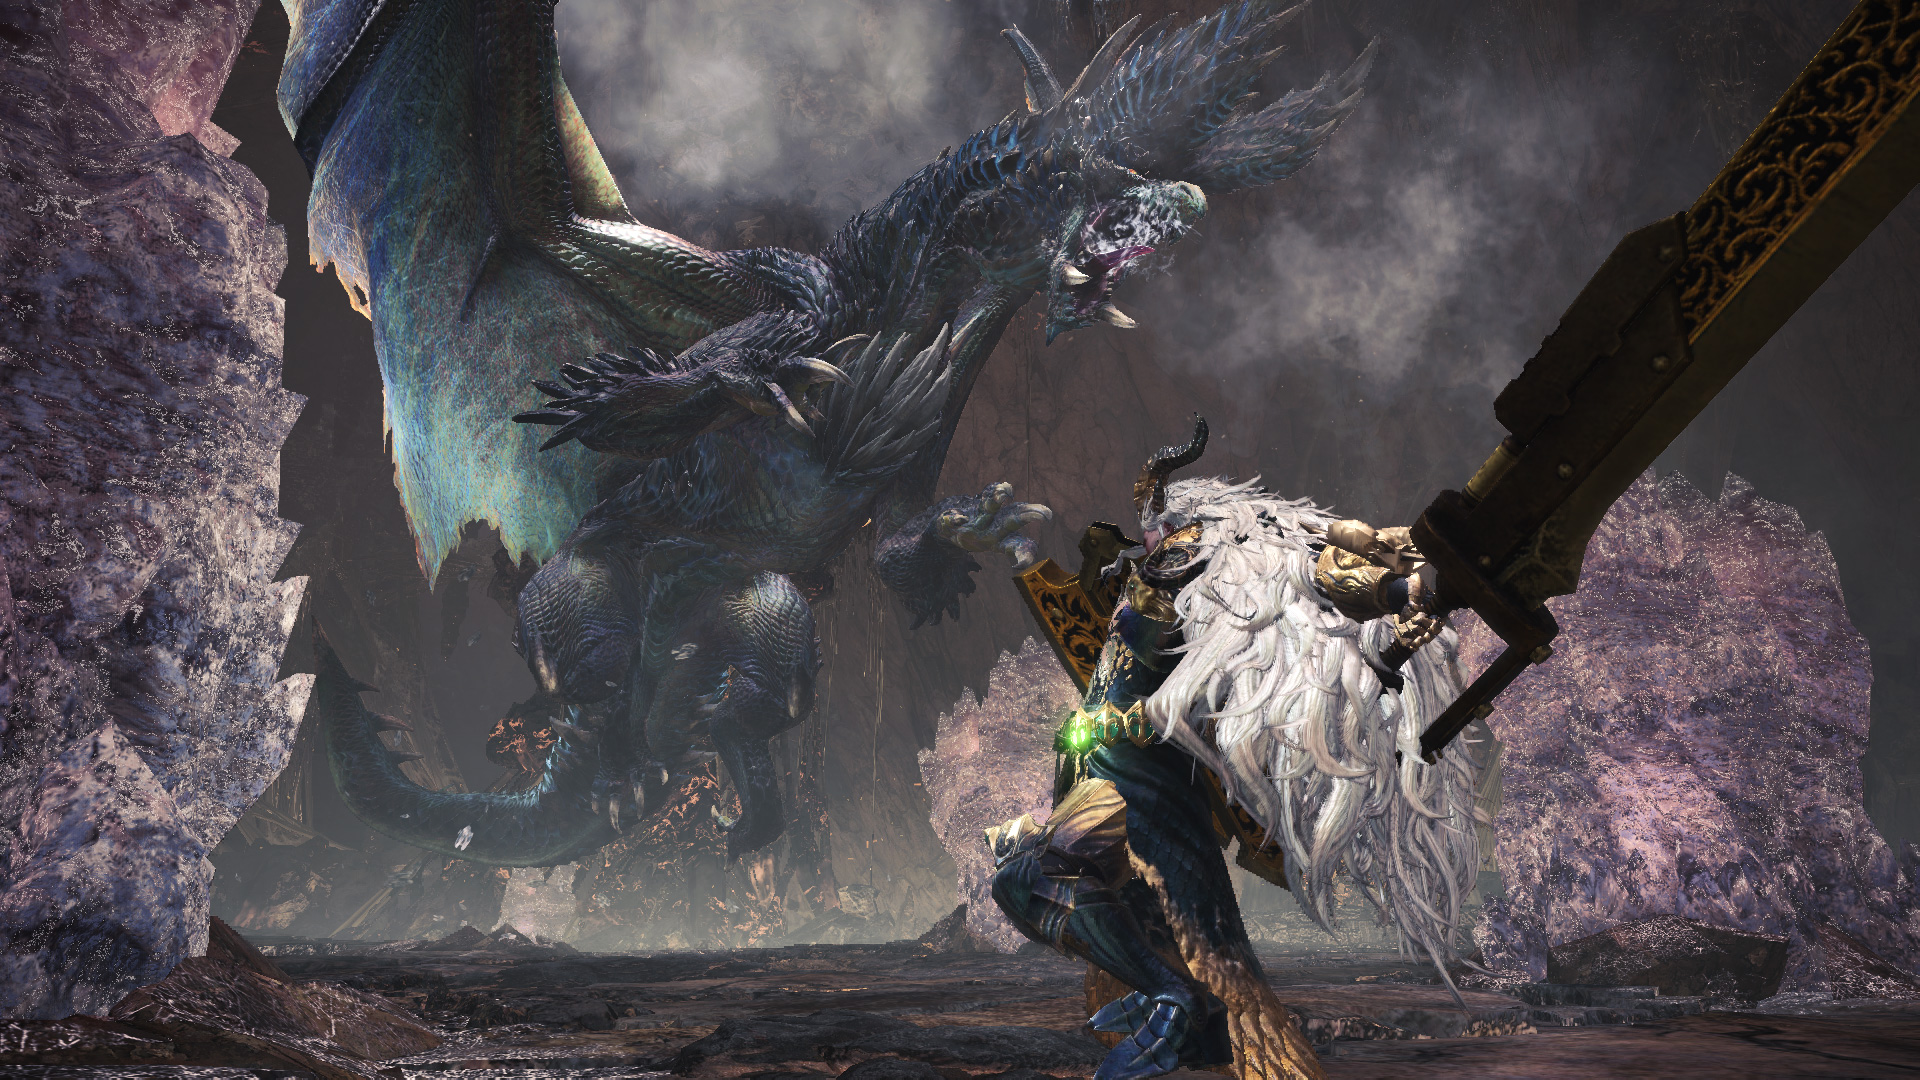 Monster Hunter Face The Brilliant Darkness Of Alatreon In Two New Iceborne Event Quests Alternating On A Daily Basis The Evening Star Dawn Of The Death Star Available